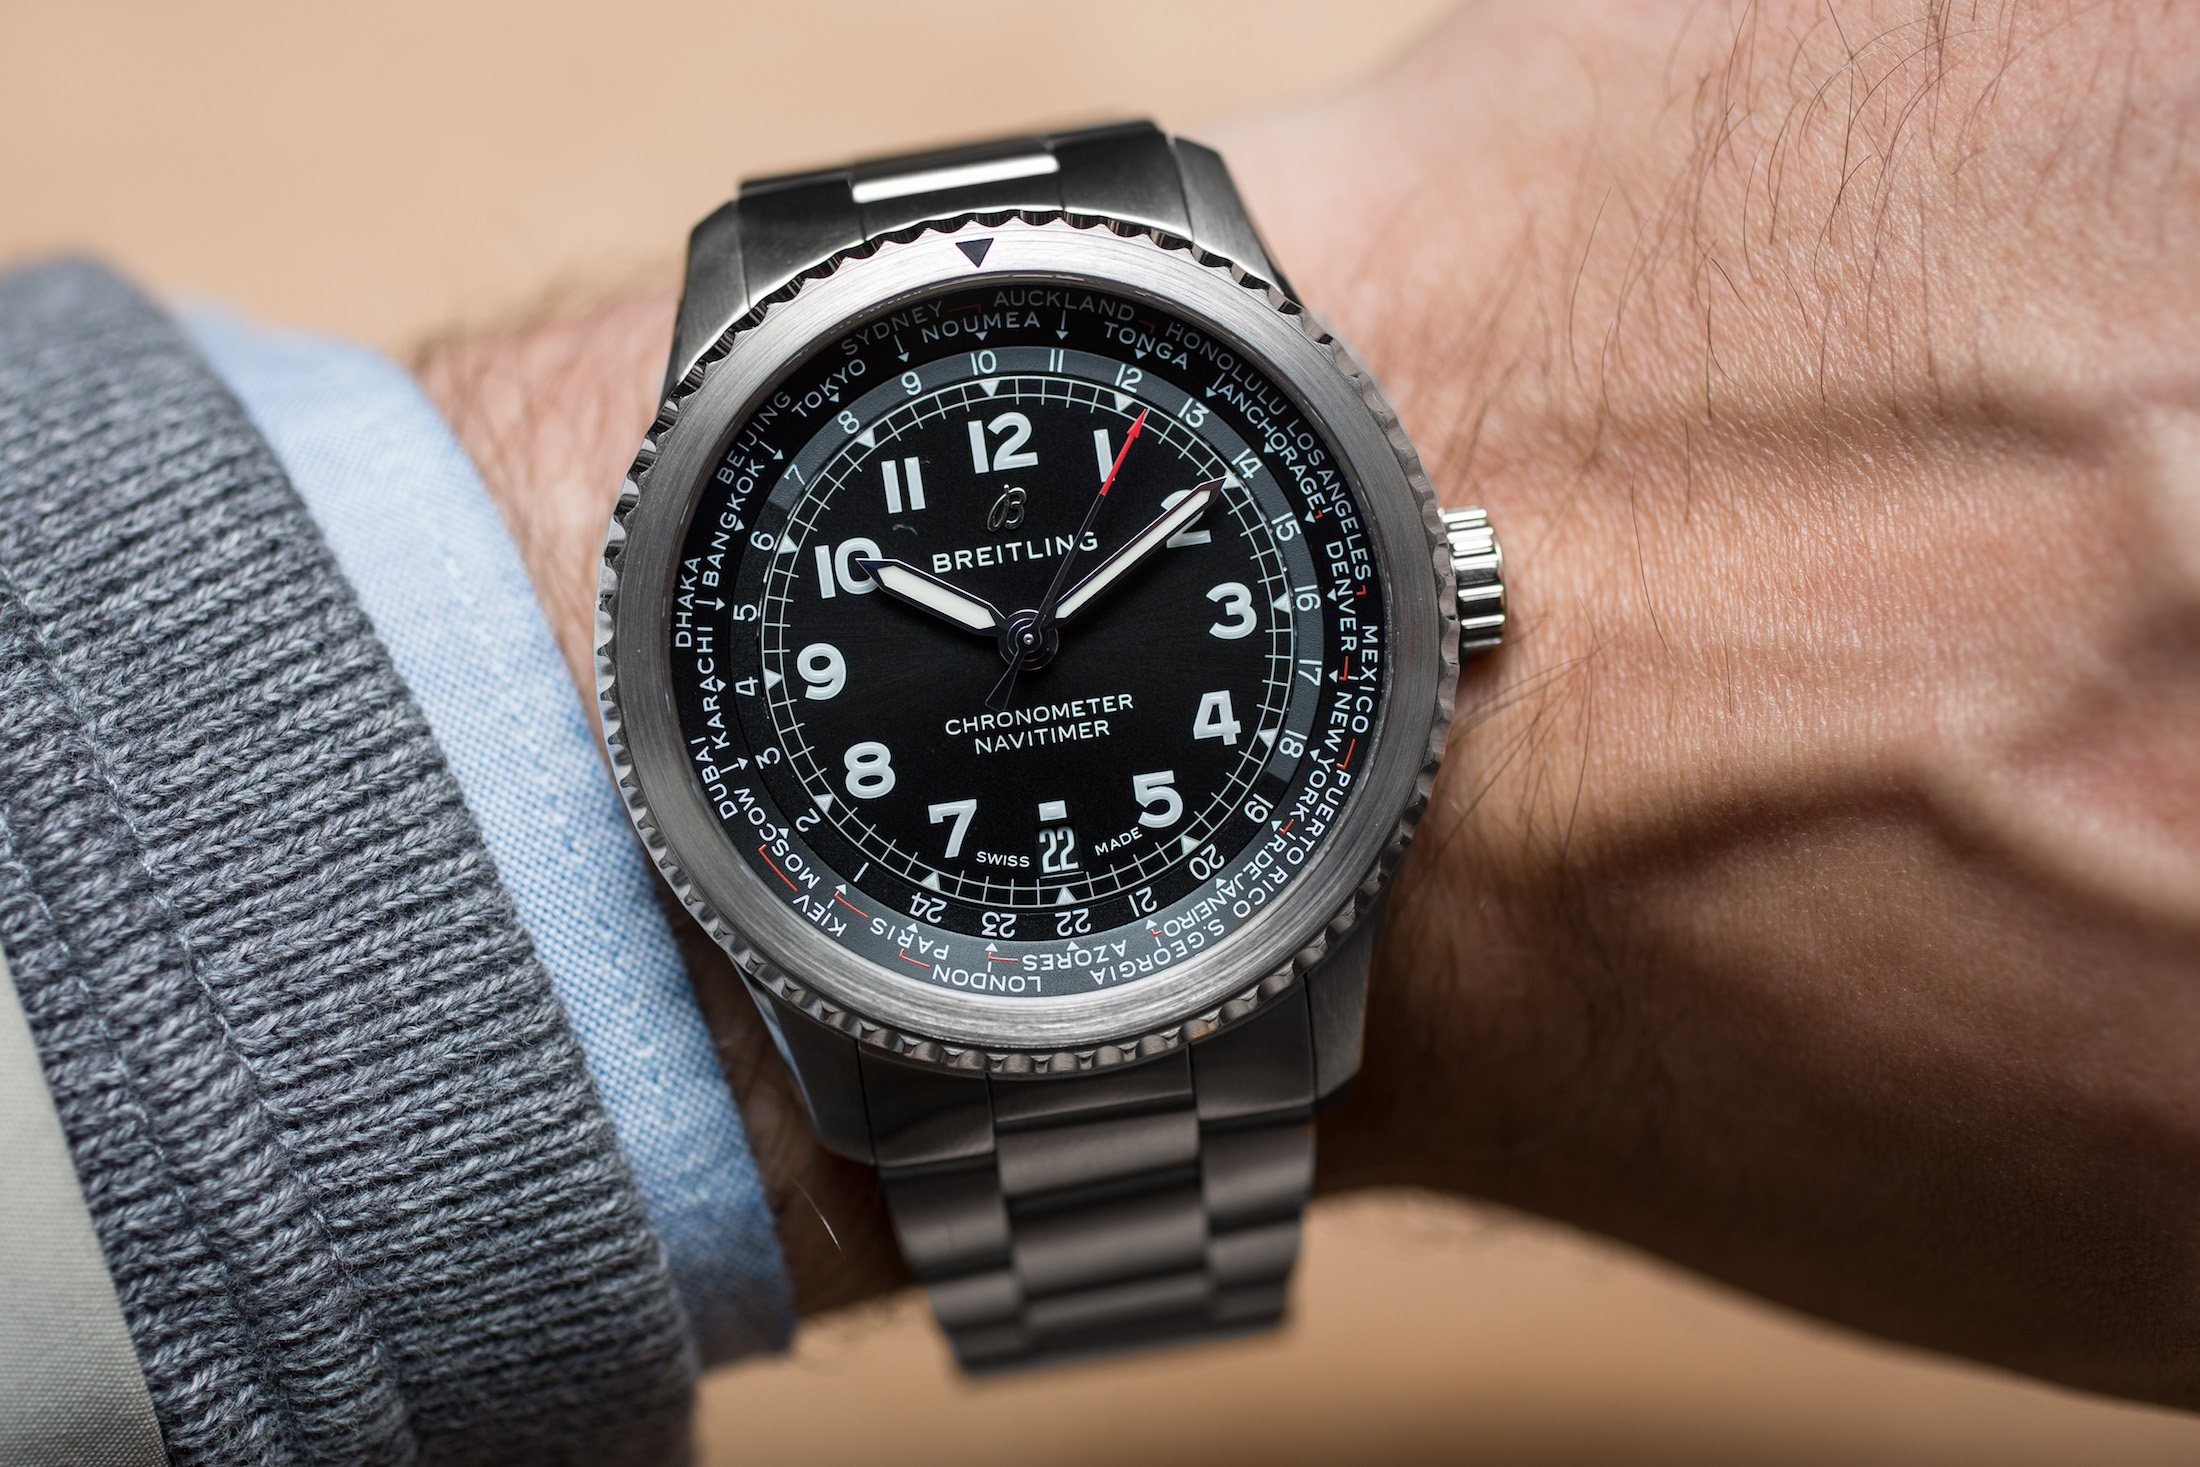 The Breitling Navitimer 8 B35 Automatic 